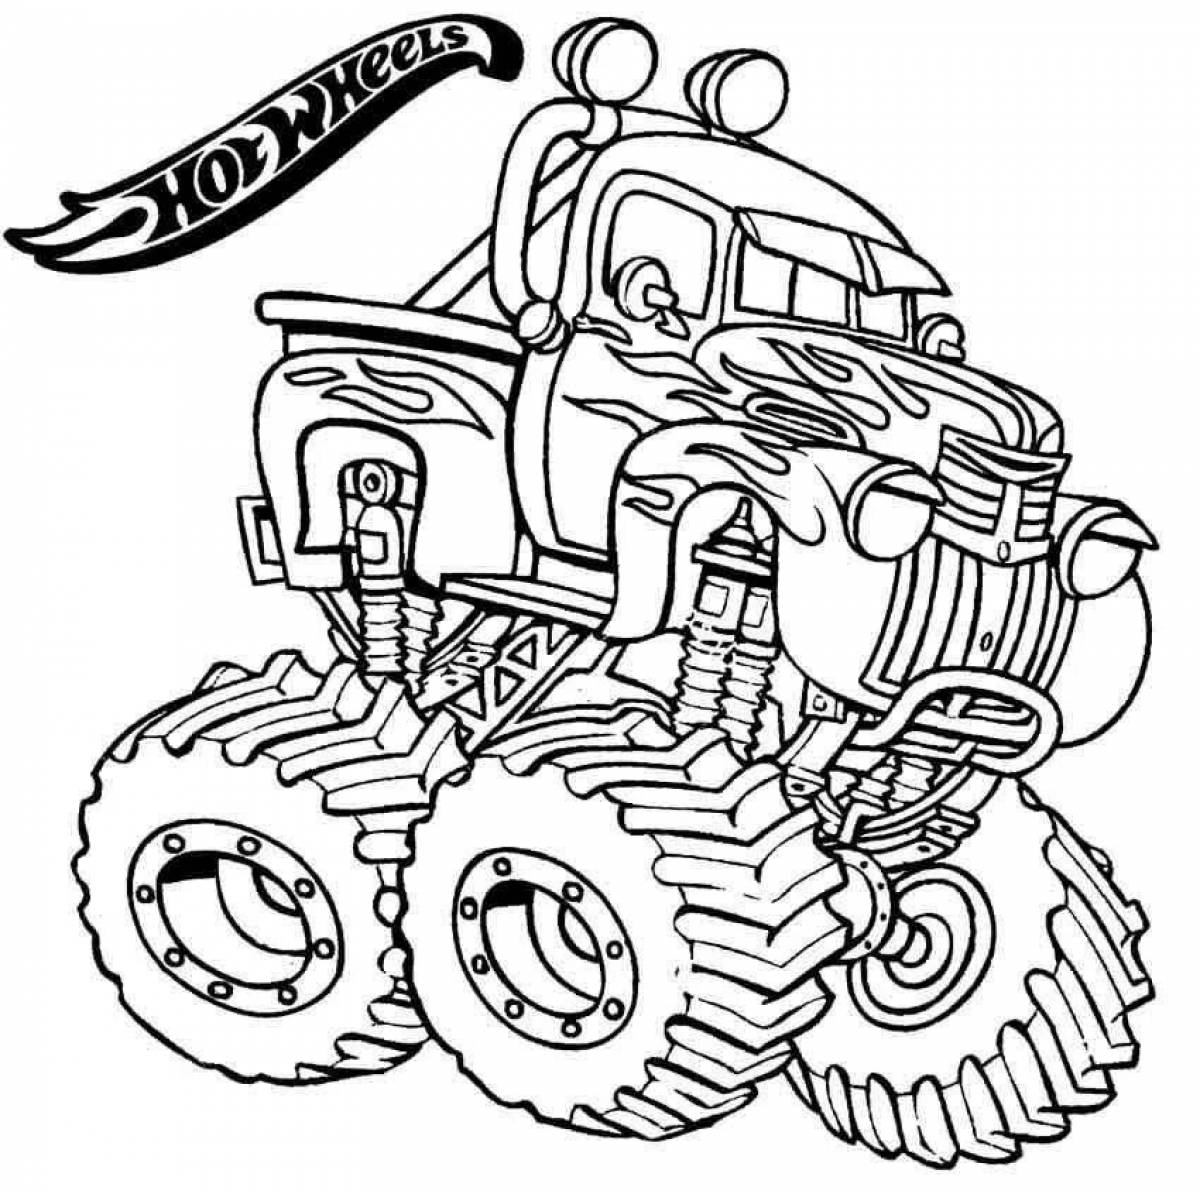 Flowering monster truck cars coloring page